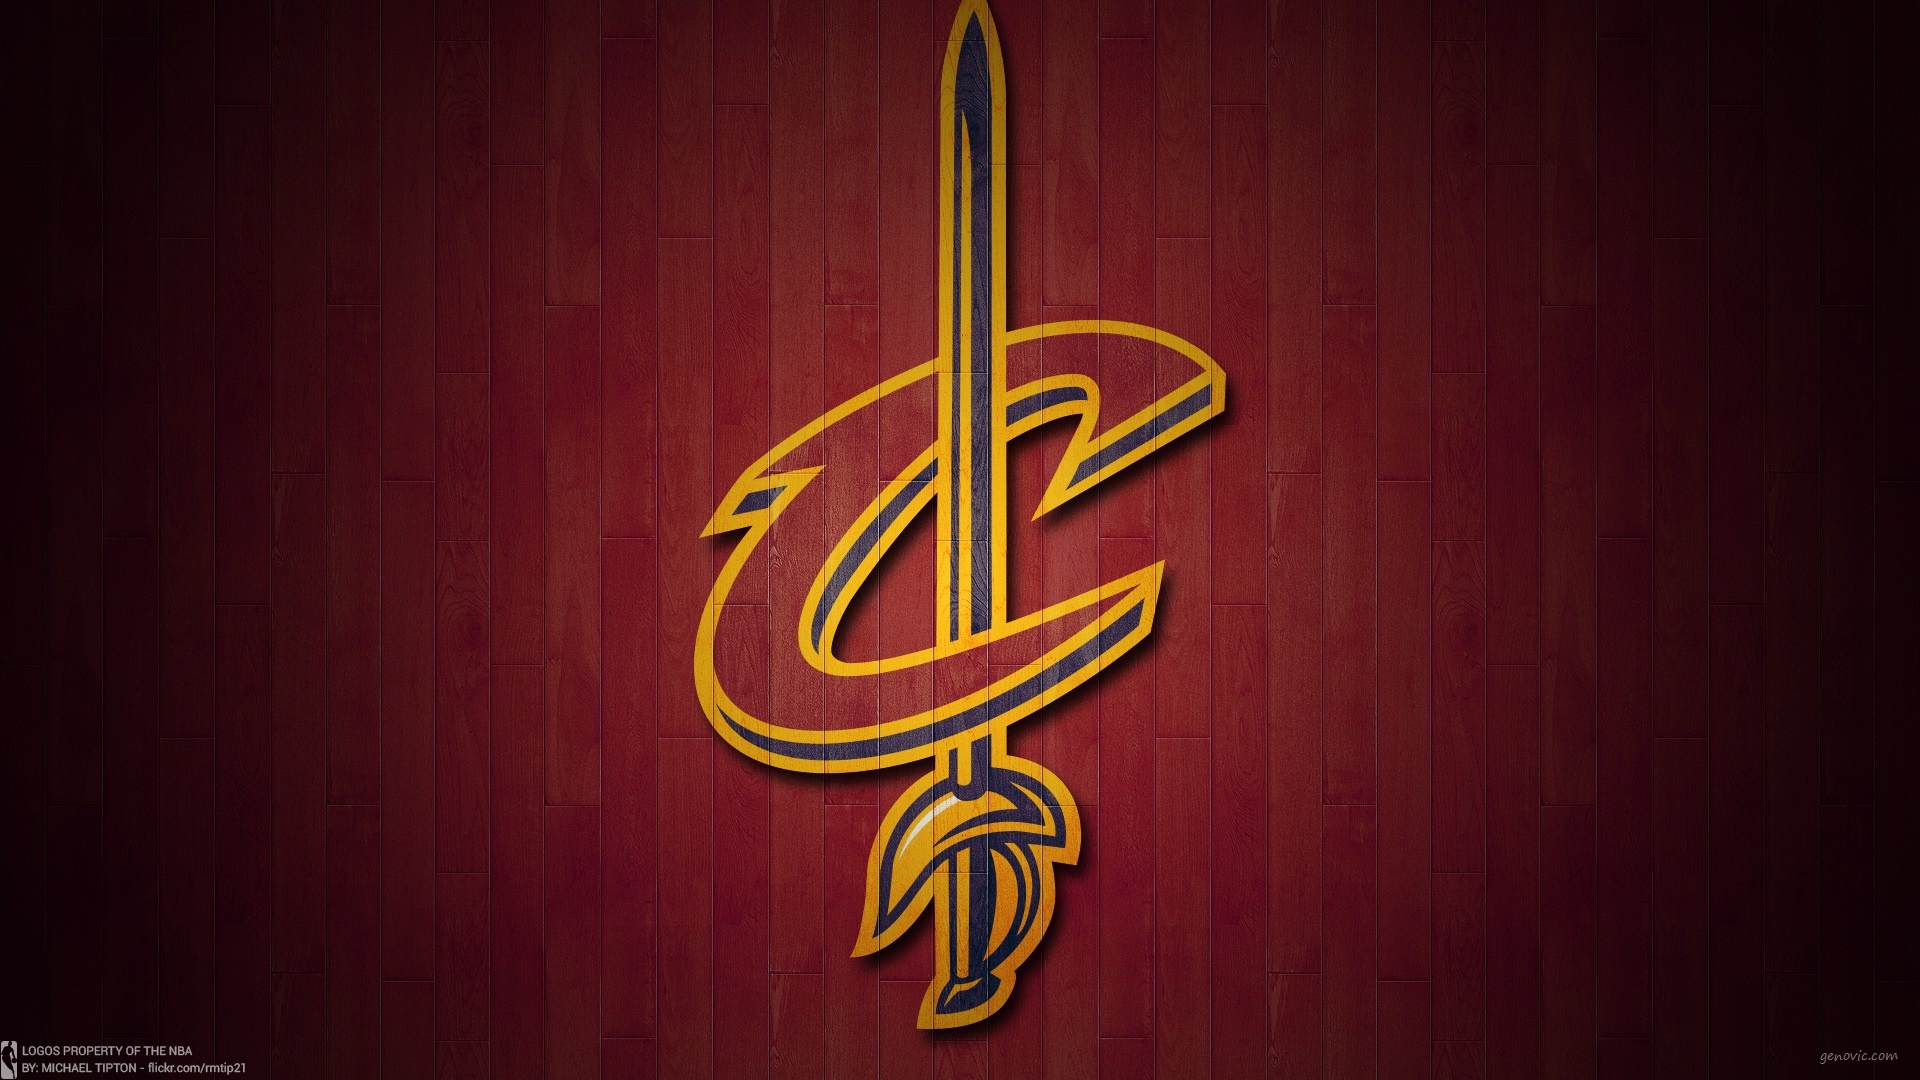 Cleveland Cavaliers: The team have won five Eastern Conference titles and one NBA title. 1920x1080 Full HD Background.